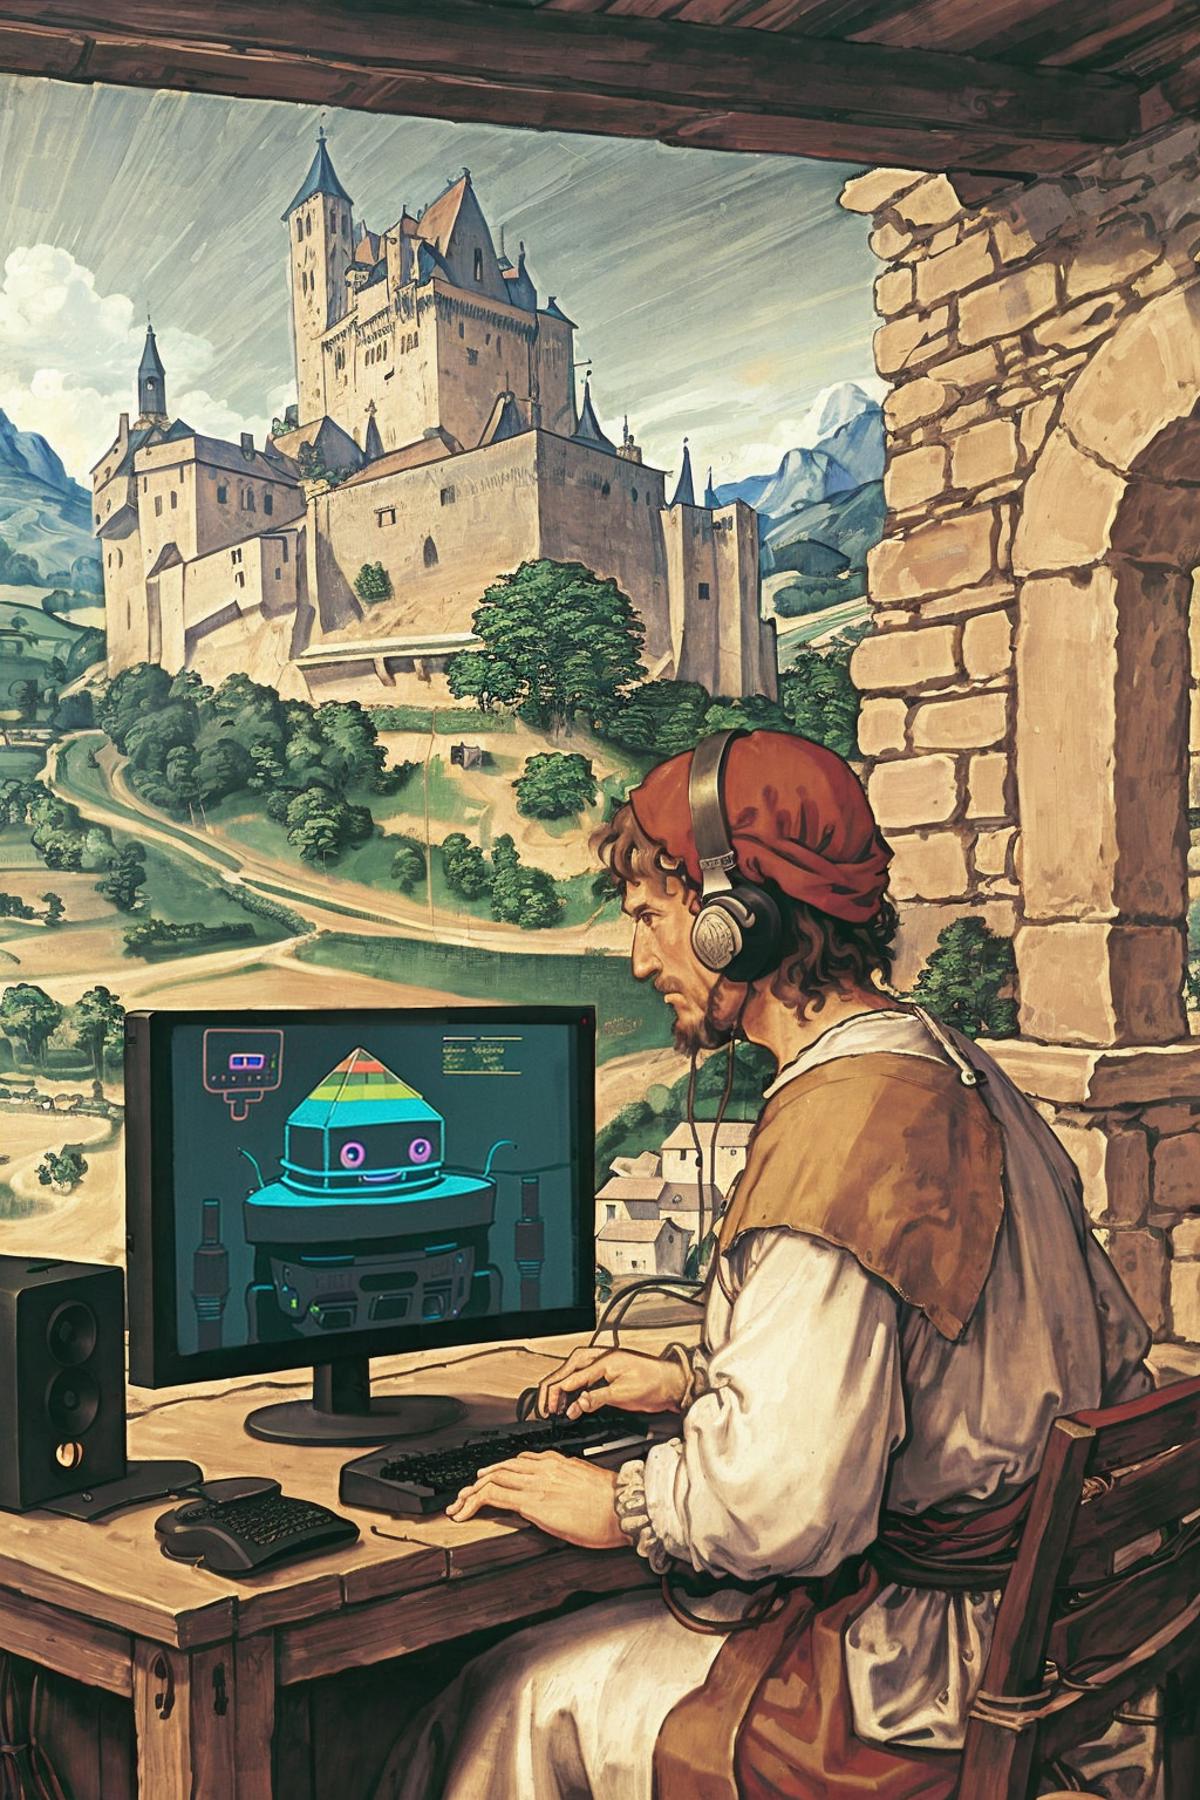 A man working on a computer with a medieval background.